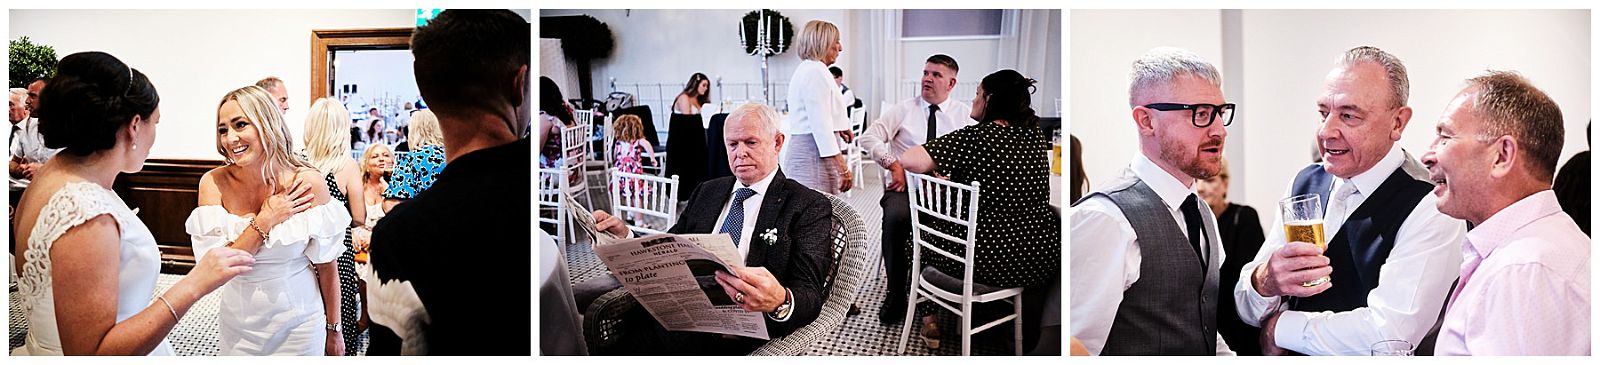 Creative candid photographs as the guests arrive to enjoy and join a wonderful evening reception at Hawkstone Hall in Shrewsbury by Documentary Wedding Photographer Stuart James